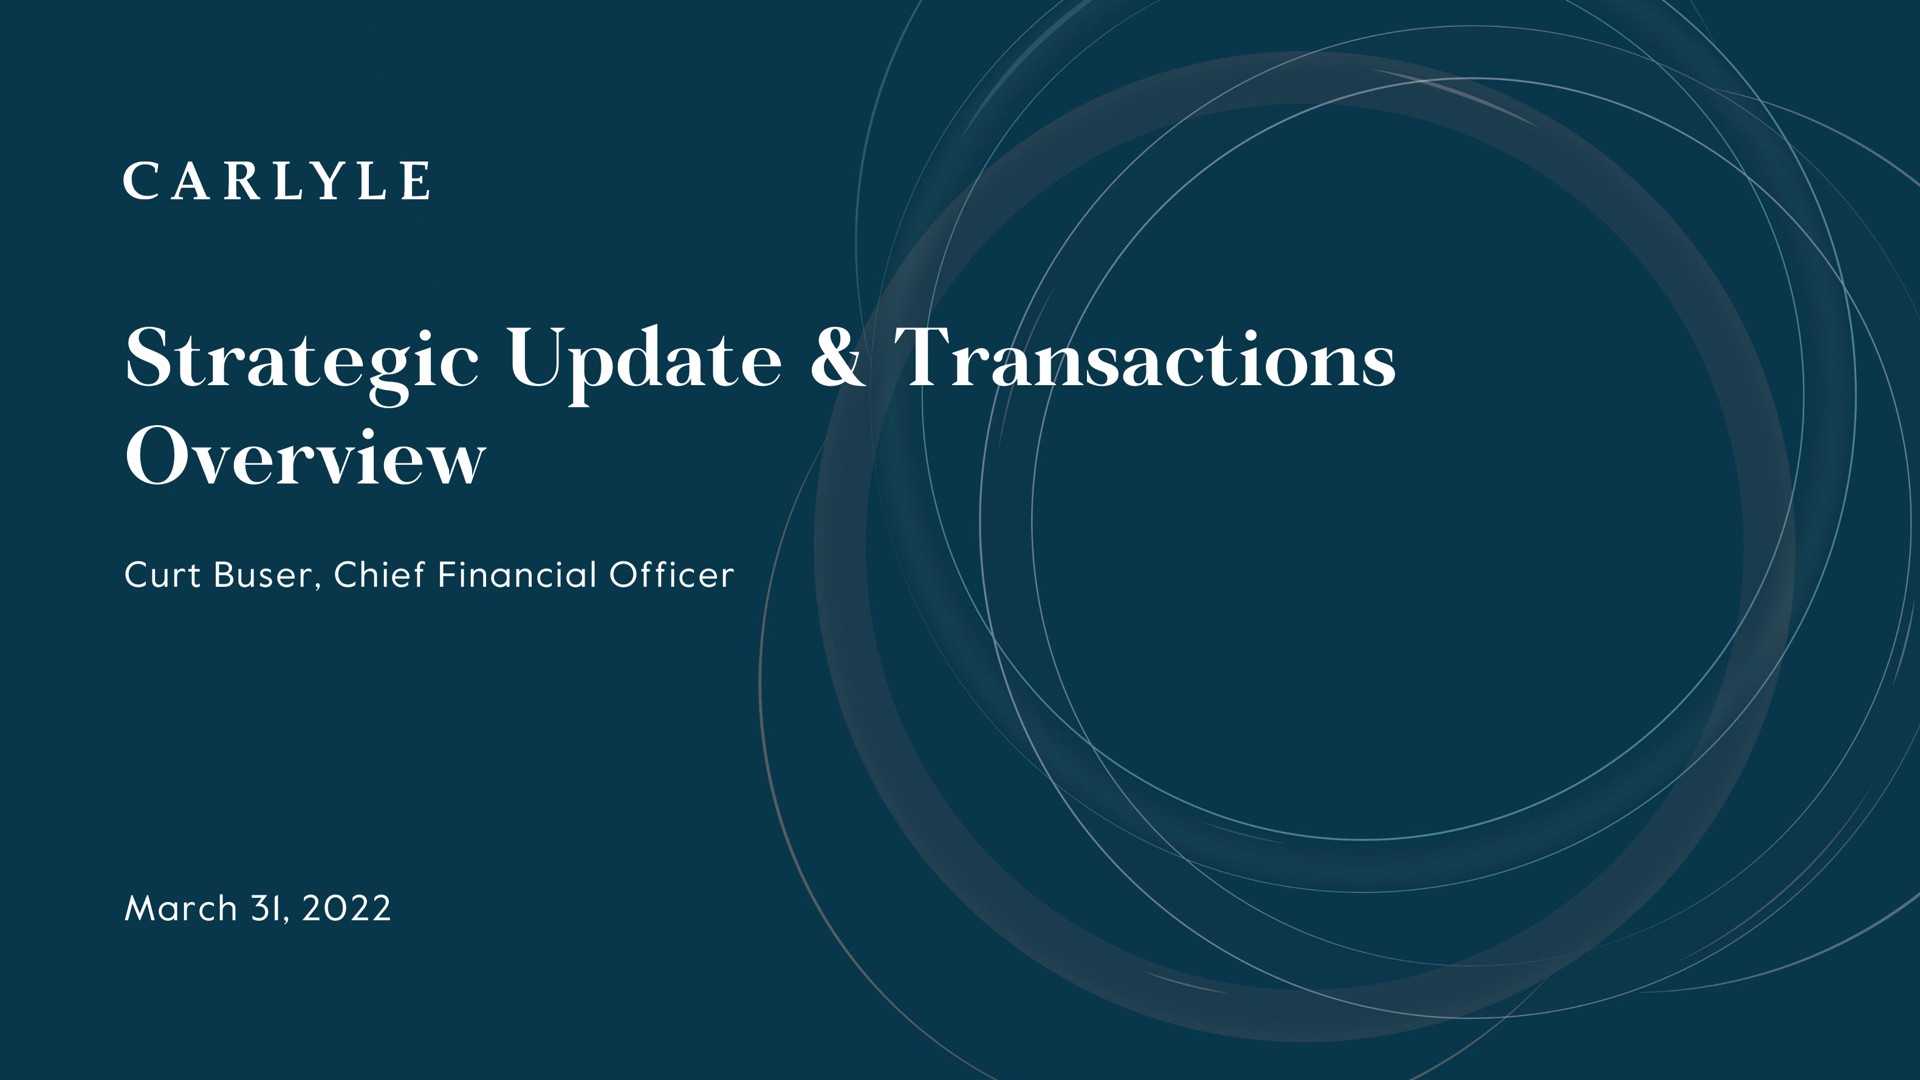 strategic update transactions overview | Carlyle